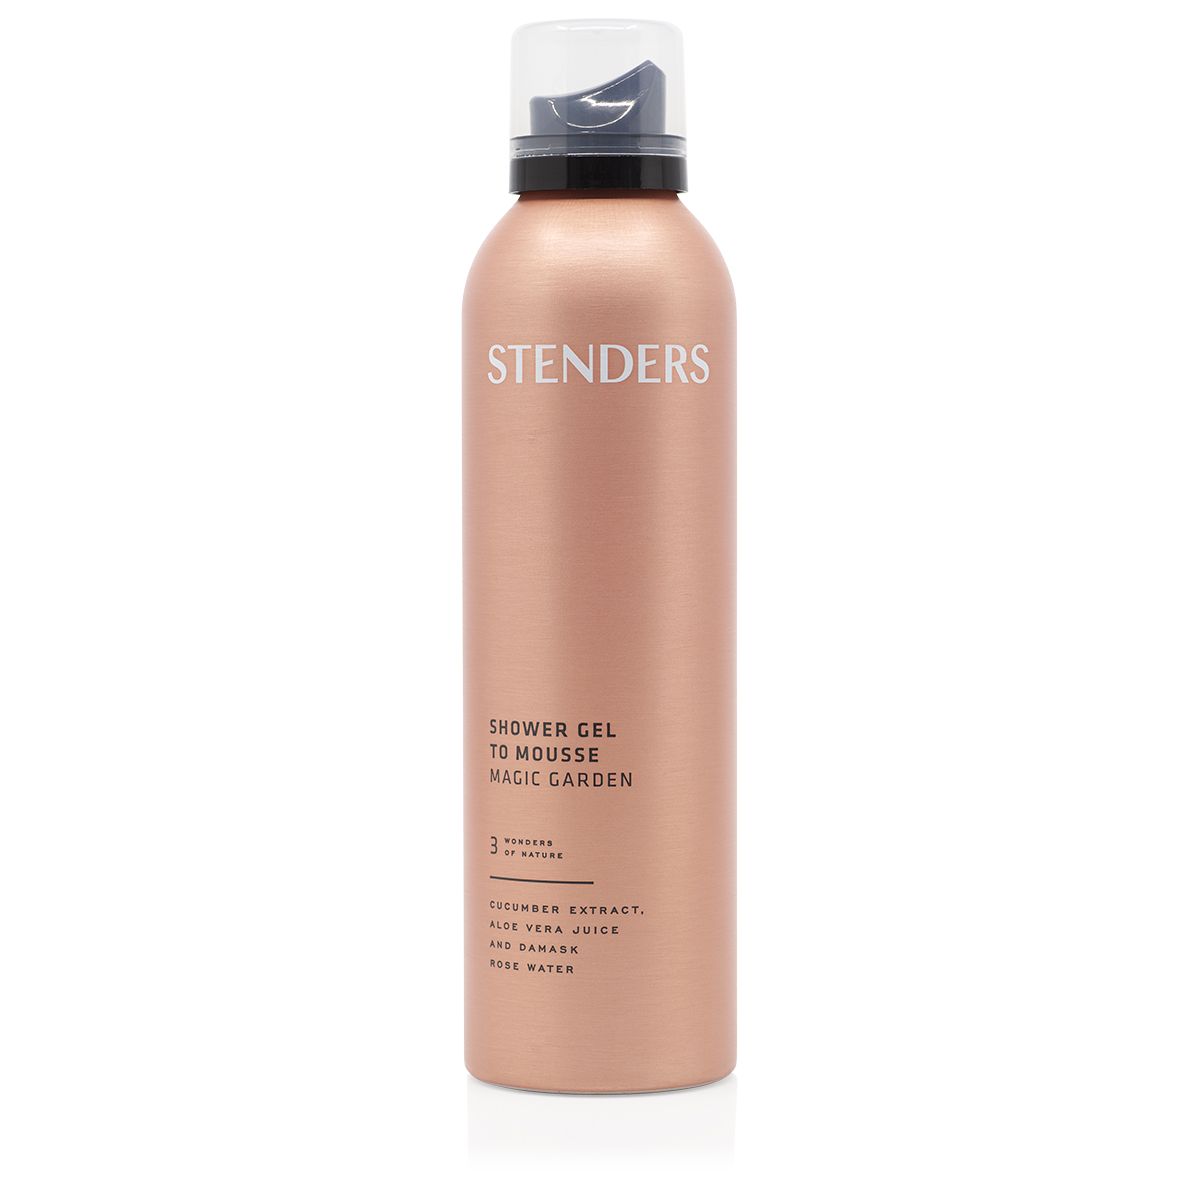 stenders shower gel to mousse magic